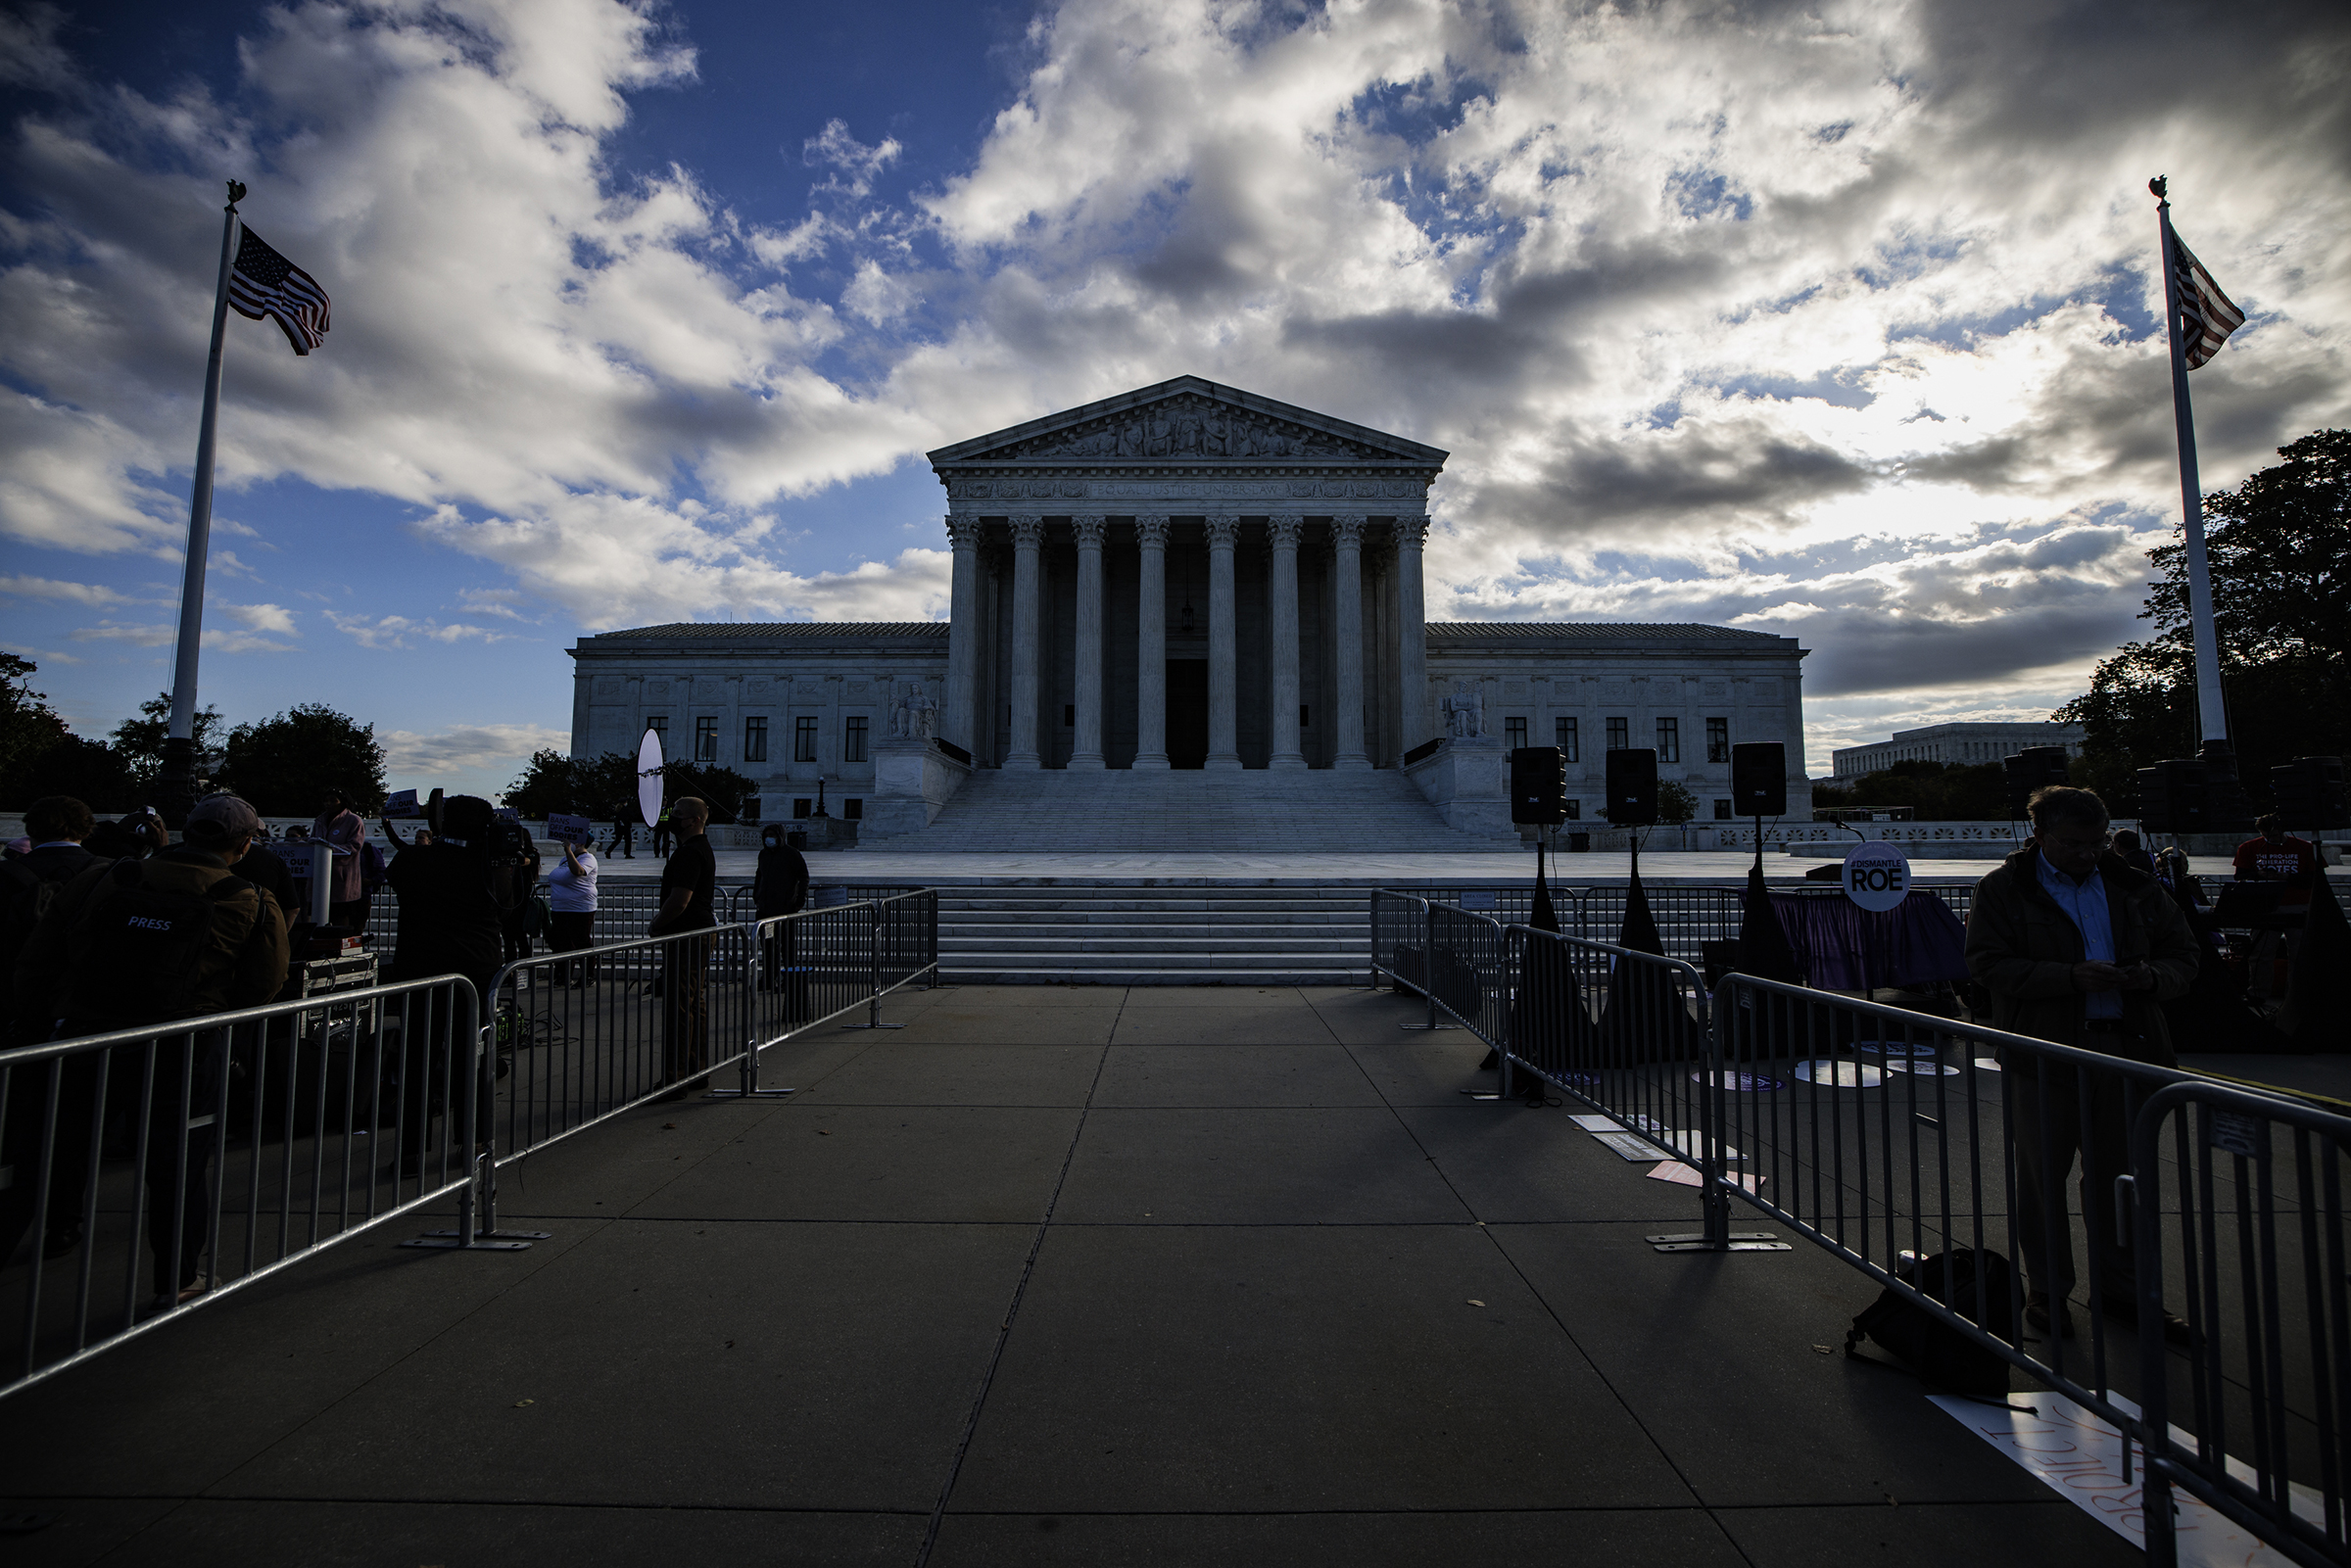 Barricades are set up to separate pro-choice and pro-life demonstrators outside of the Supreme Court in Washington, D.C., on Nov. 1, 2021.